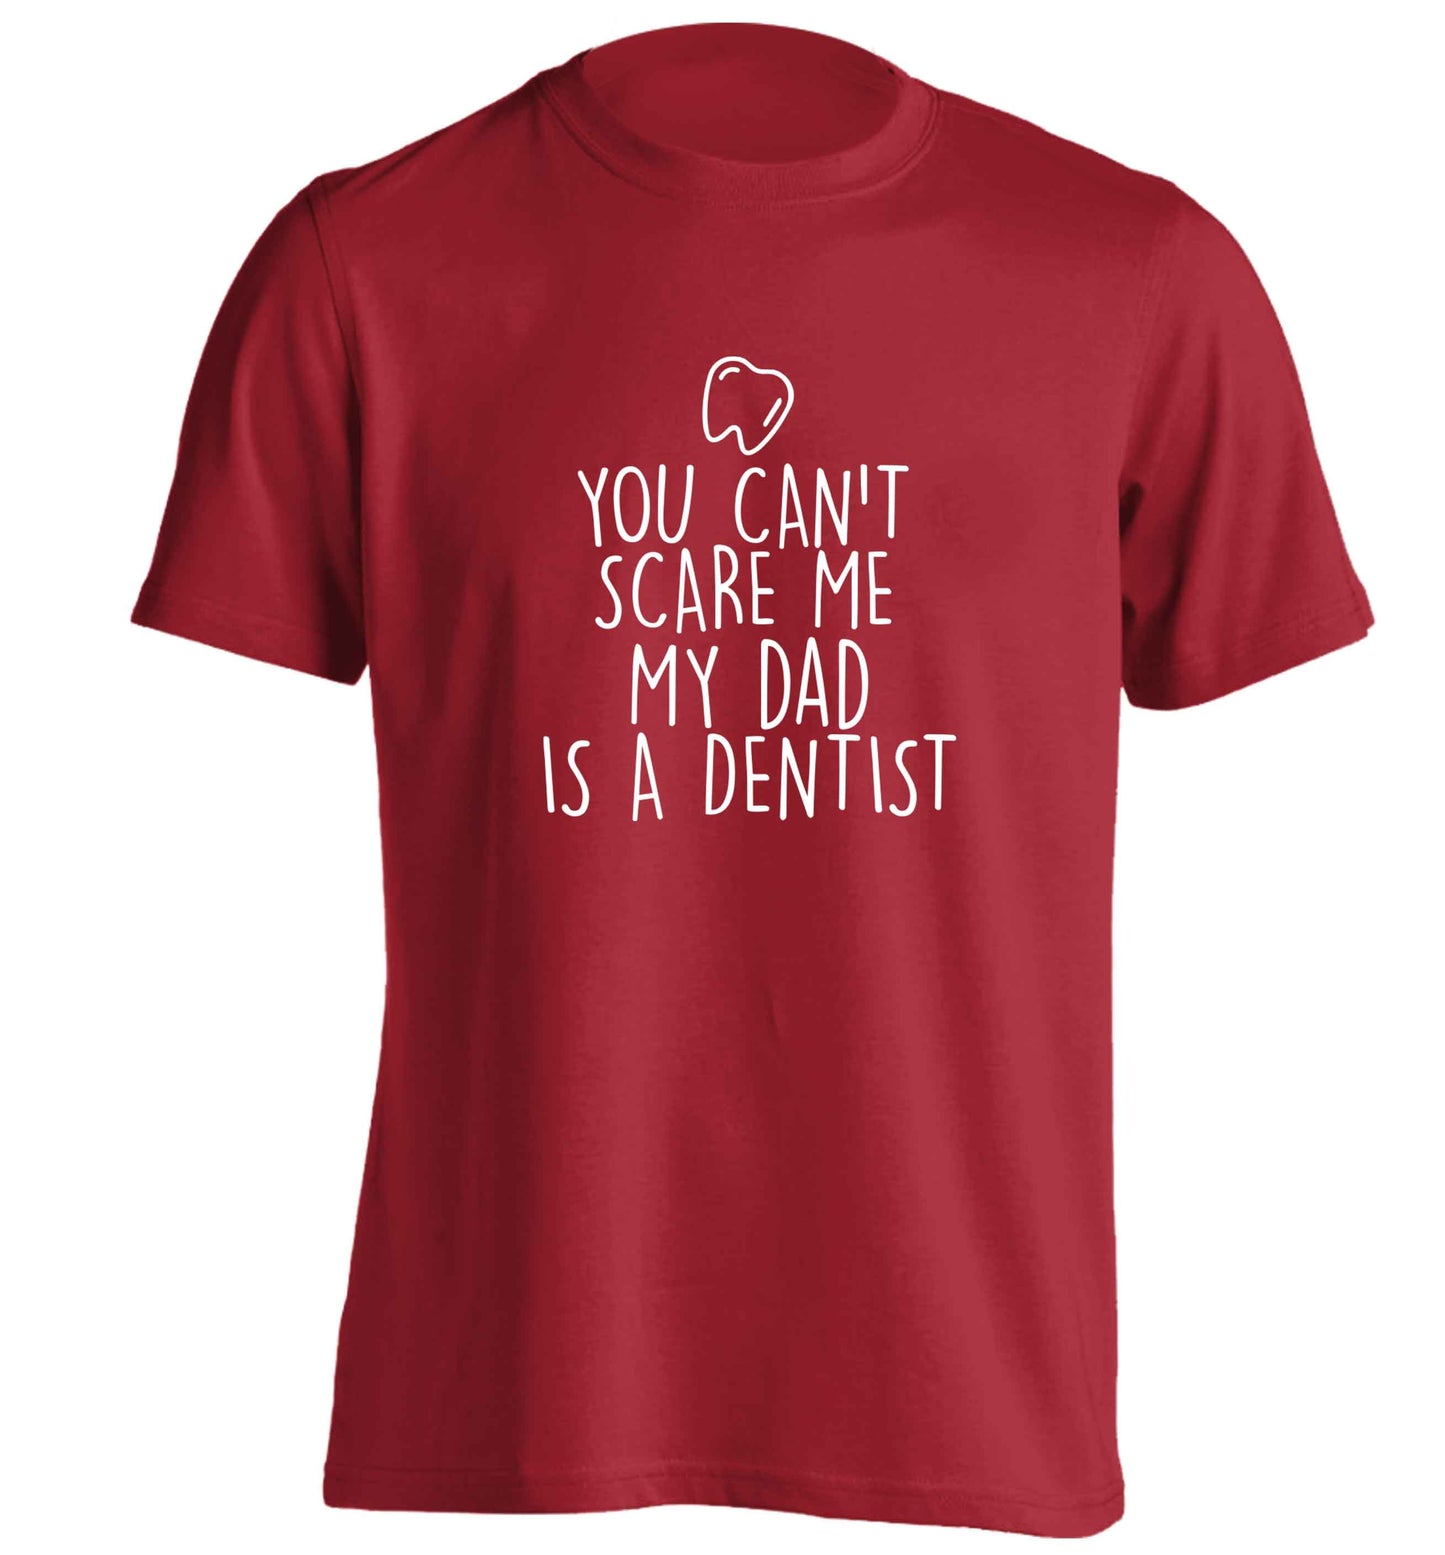 You can't scare me my dad is a dentist adults unisex red Tshirt 2XL